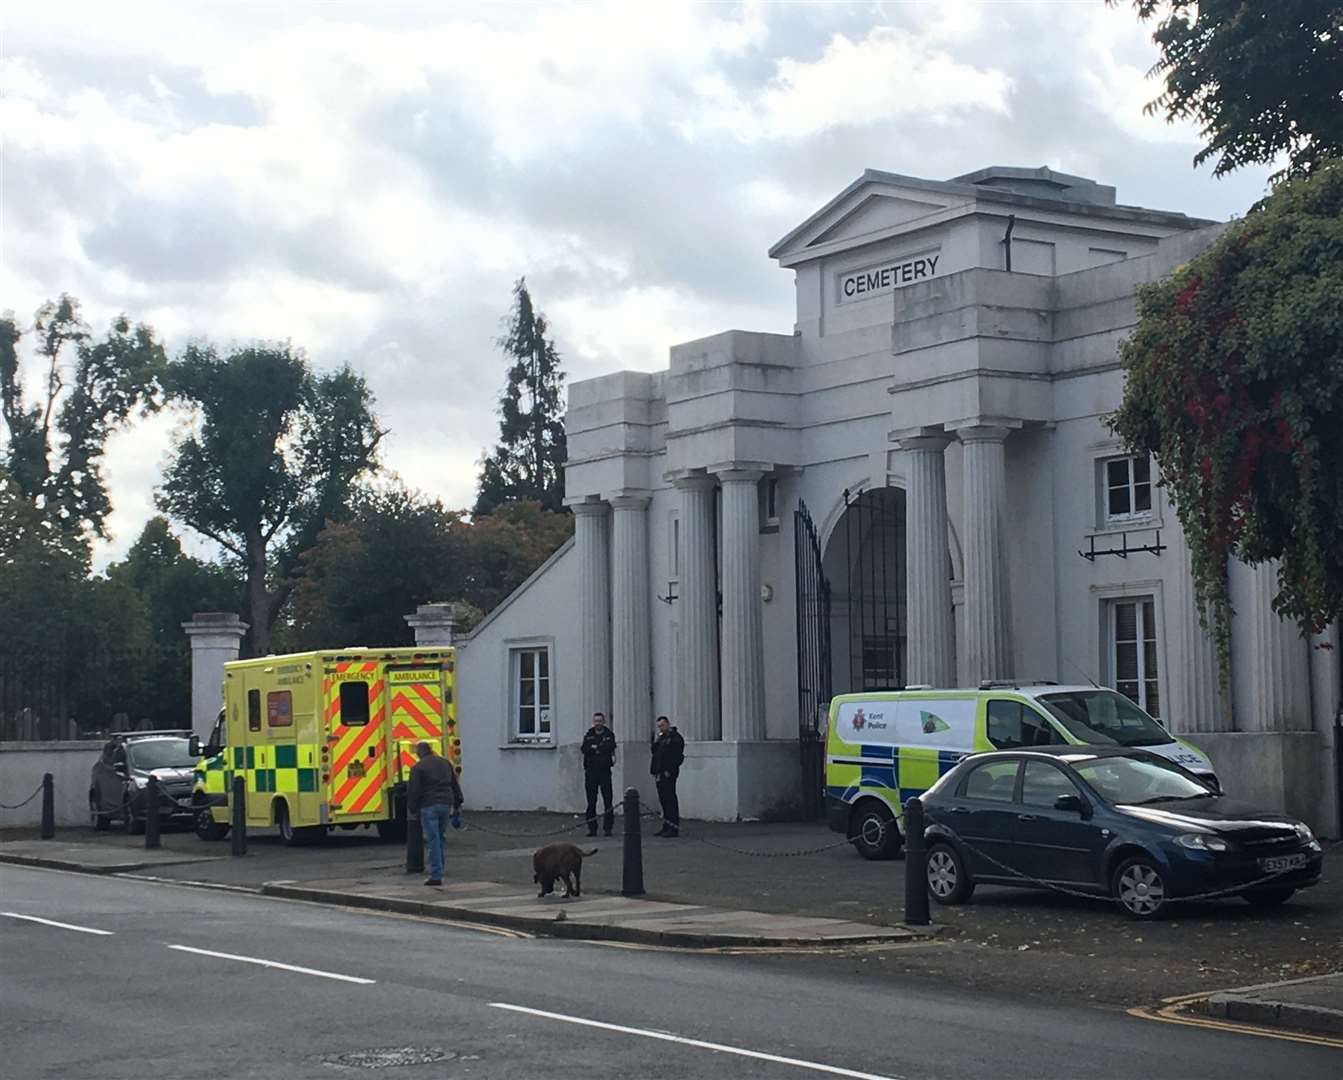 Police and medics have been pictured outside Gravesend cemetery